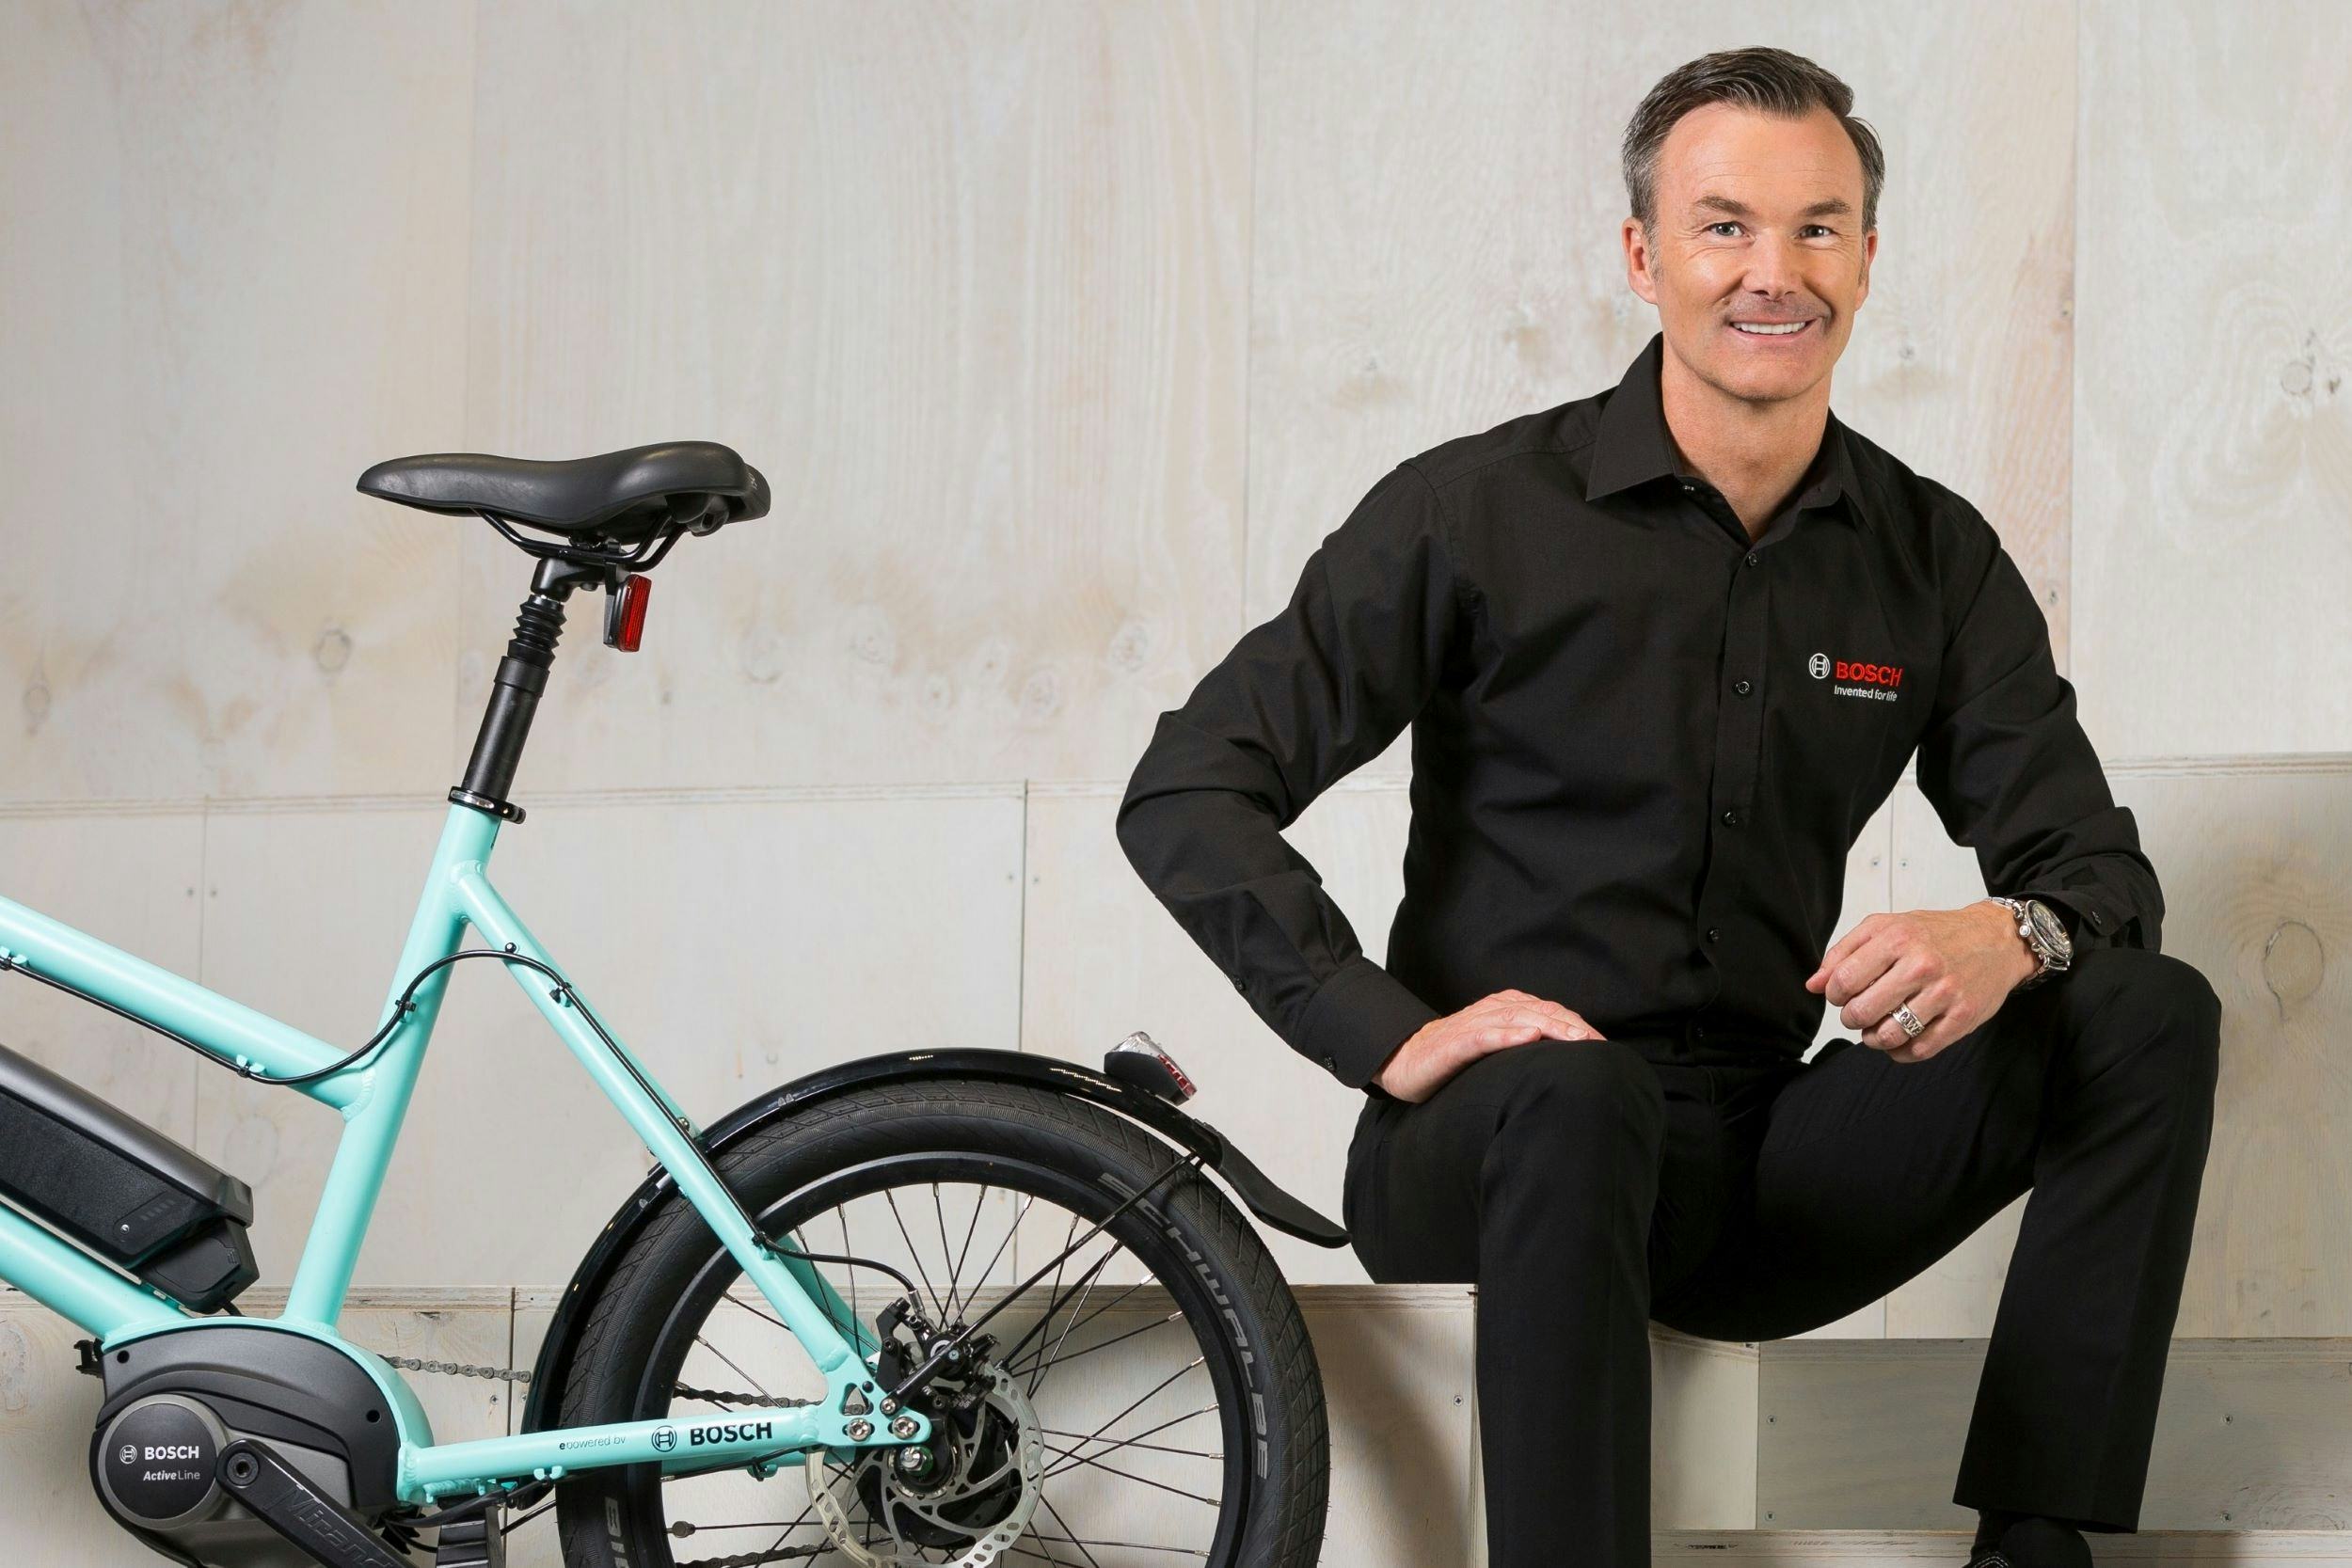 Bosch eBike Systems CEO Claus Fleischer shares his thoughts on what's in store for the e-bike industry. - Photo Bosch eBike Systems